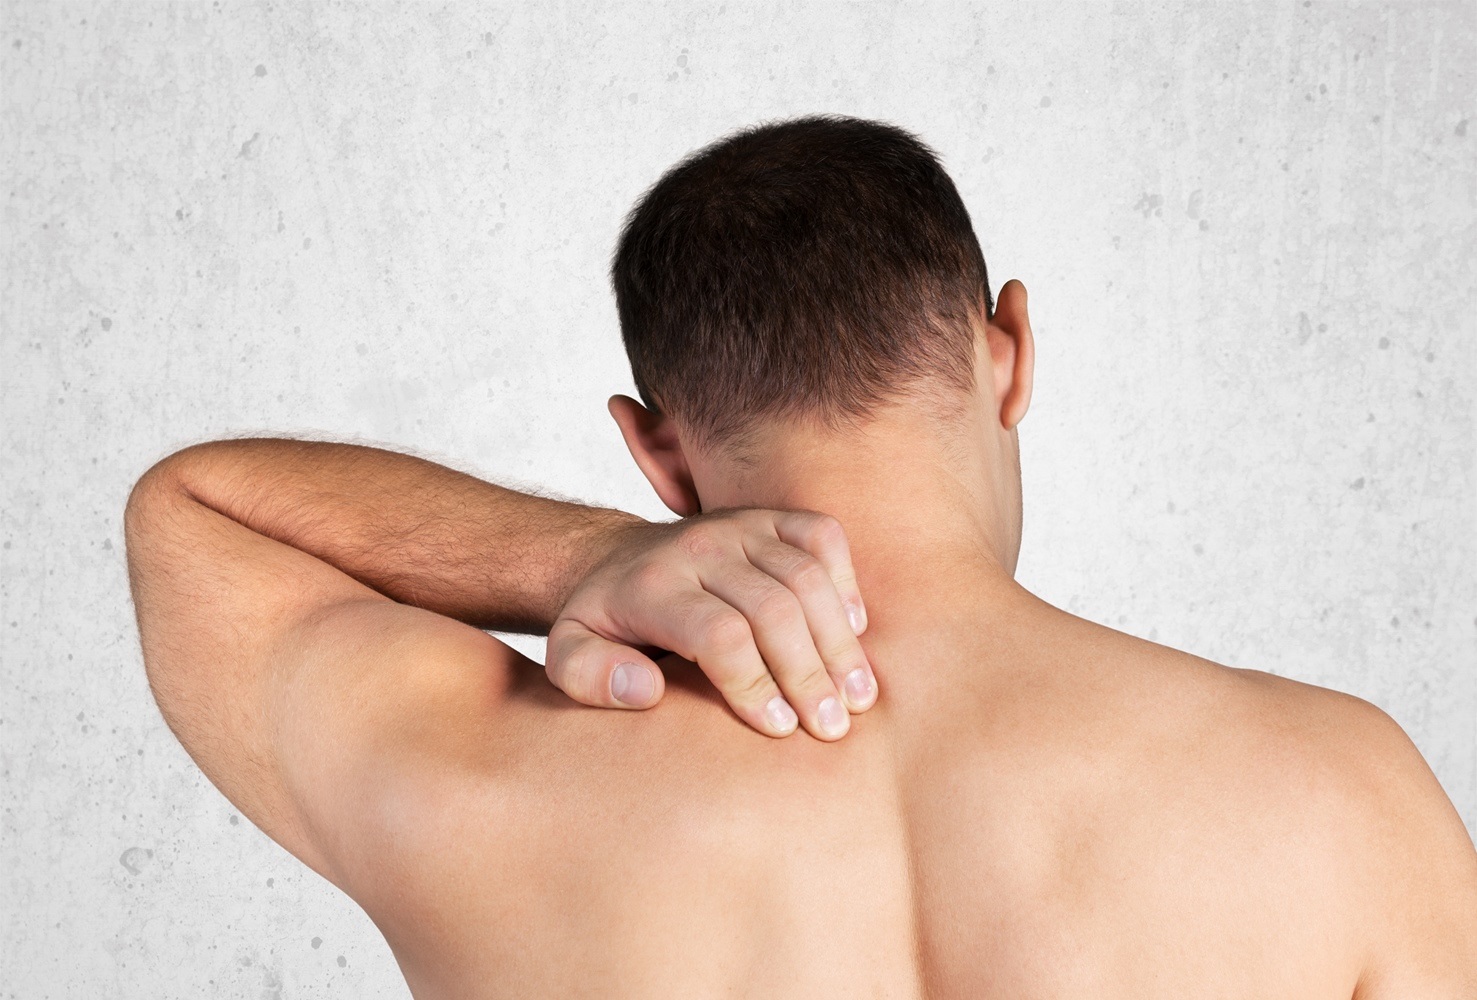 Chiropractic Neck Care And Causes Of Neck Pain